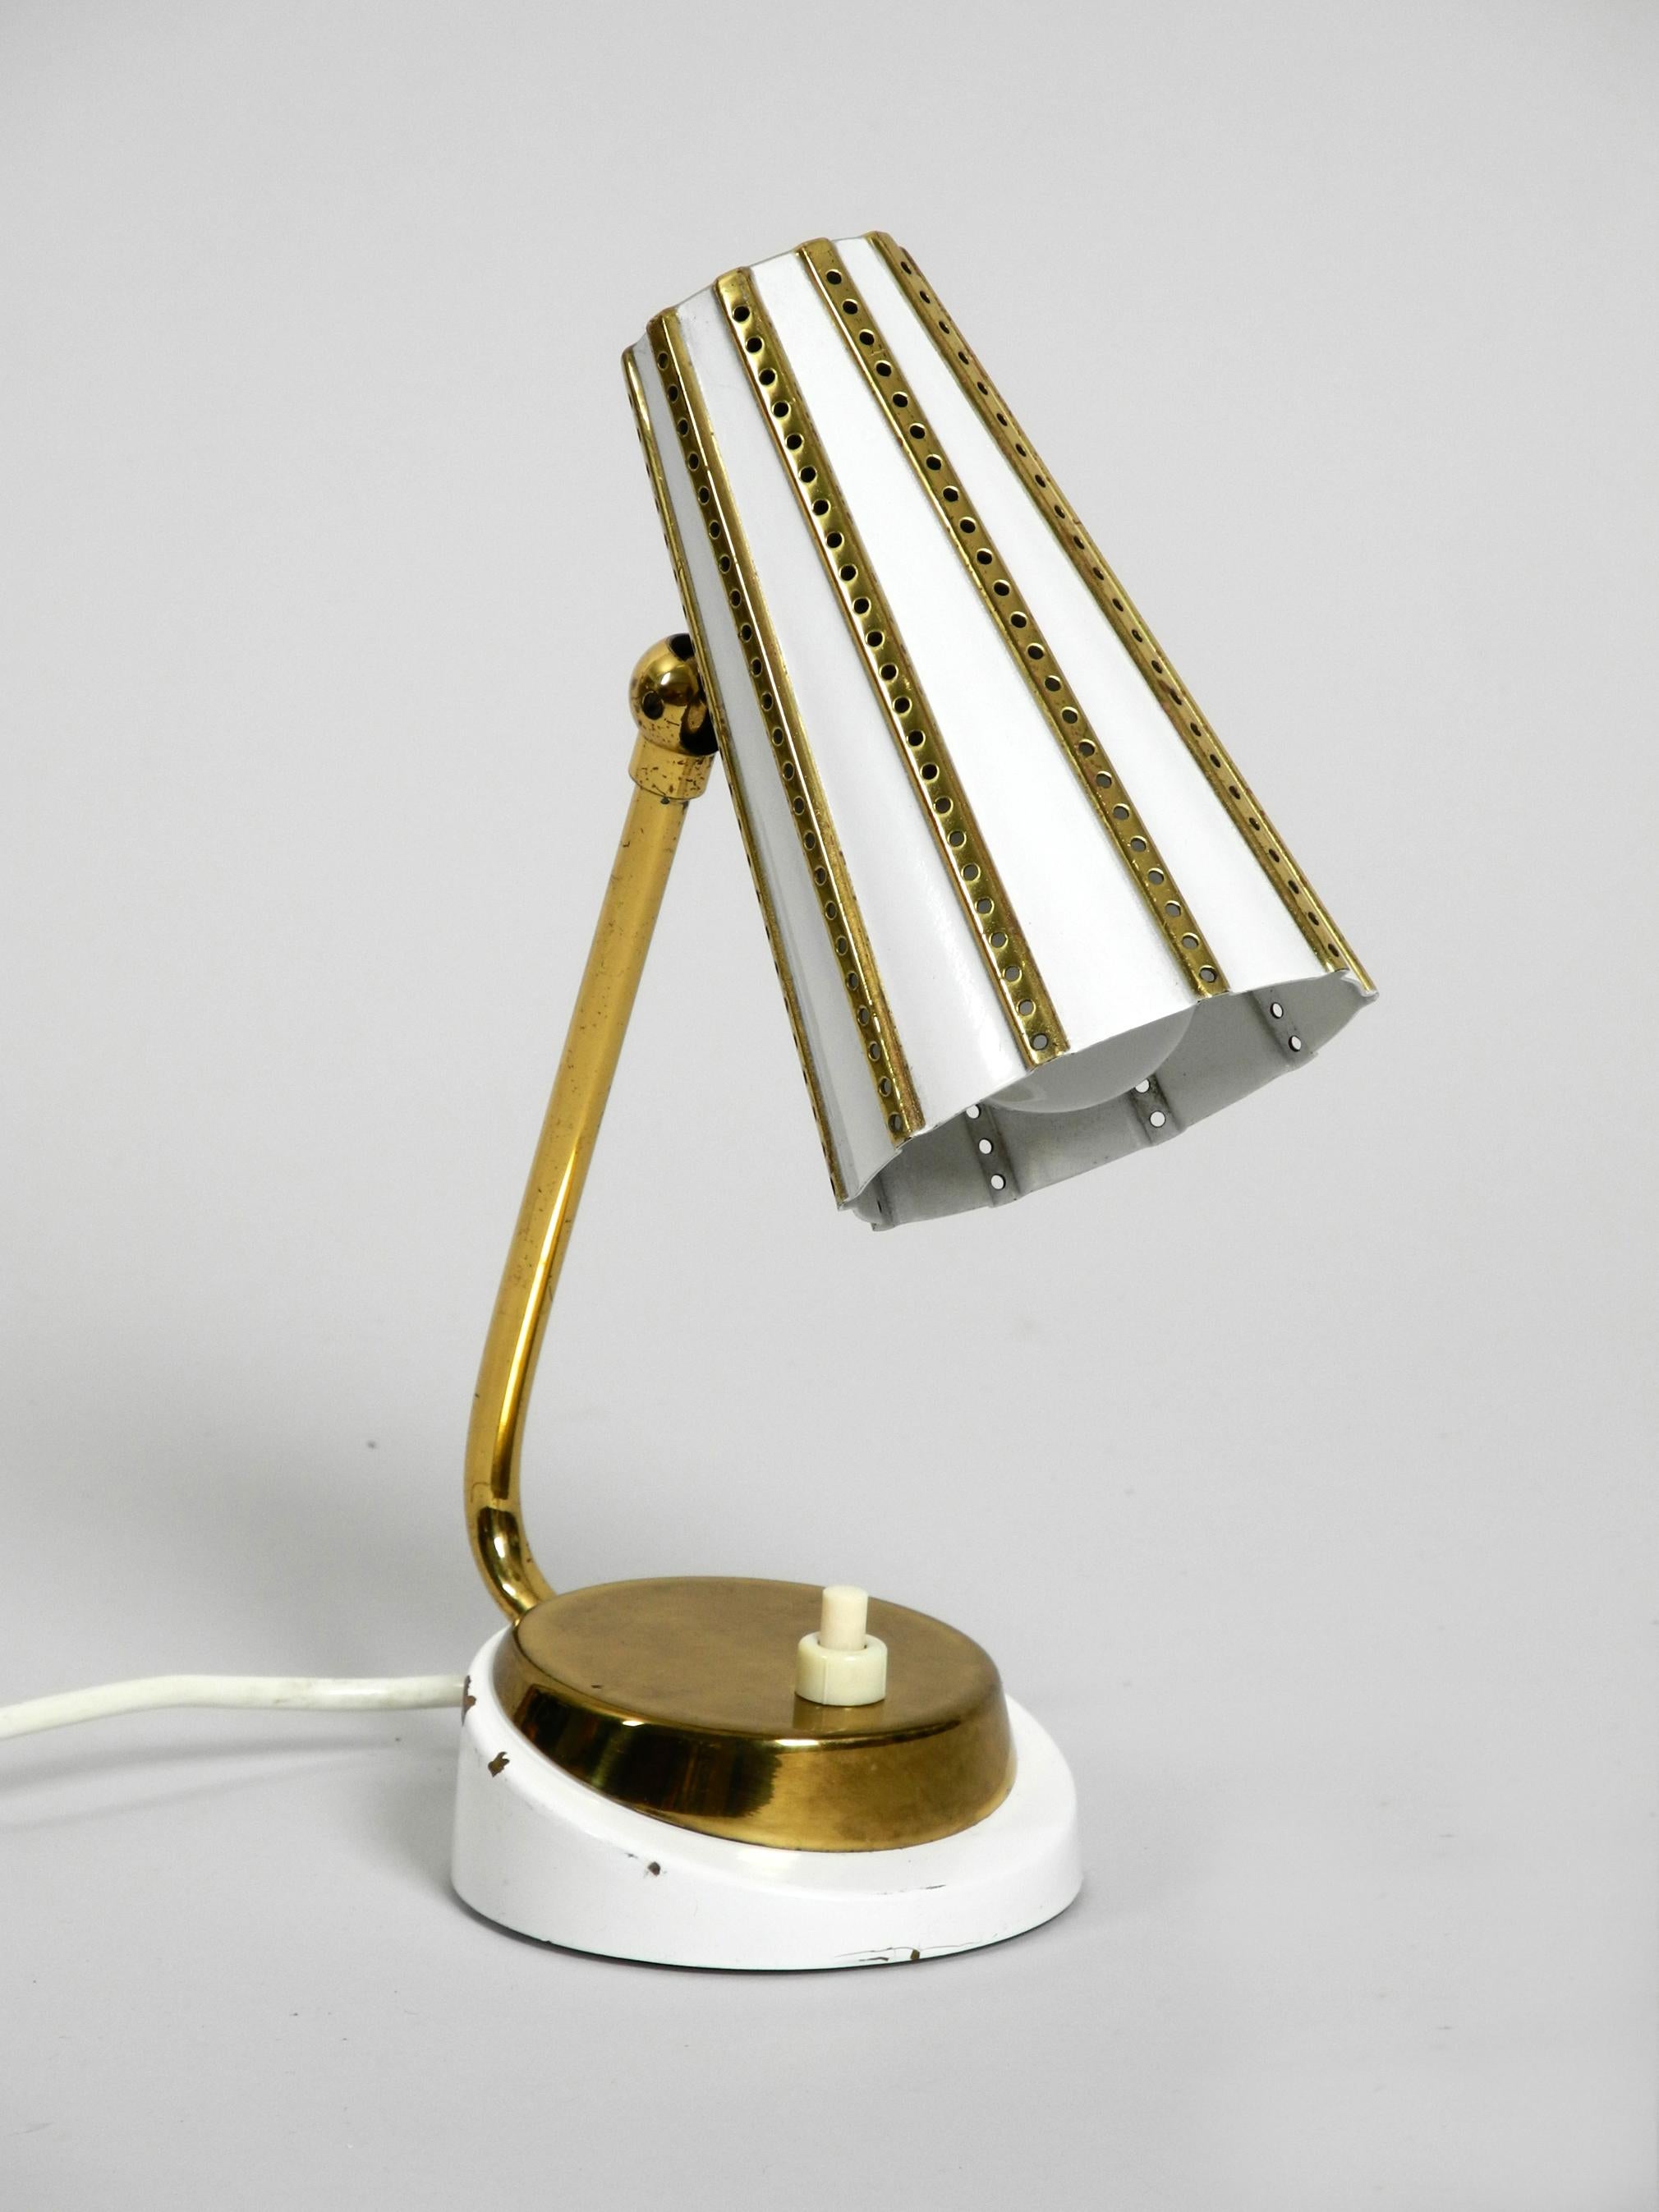 Beautiful midcentury brass table bedside lamp with perforated metal shade.
Very nice design of the 1950s with great patina.
Shade can be continuously turned up and down.
The whole lamp is made of brass and is painted partly in white.
100%